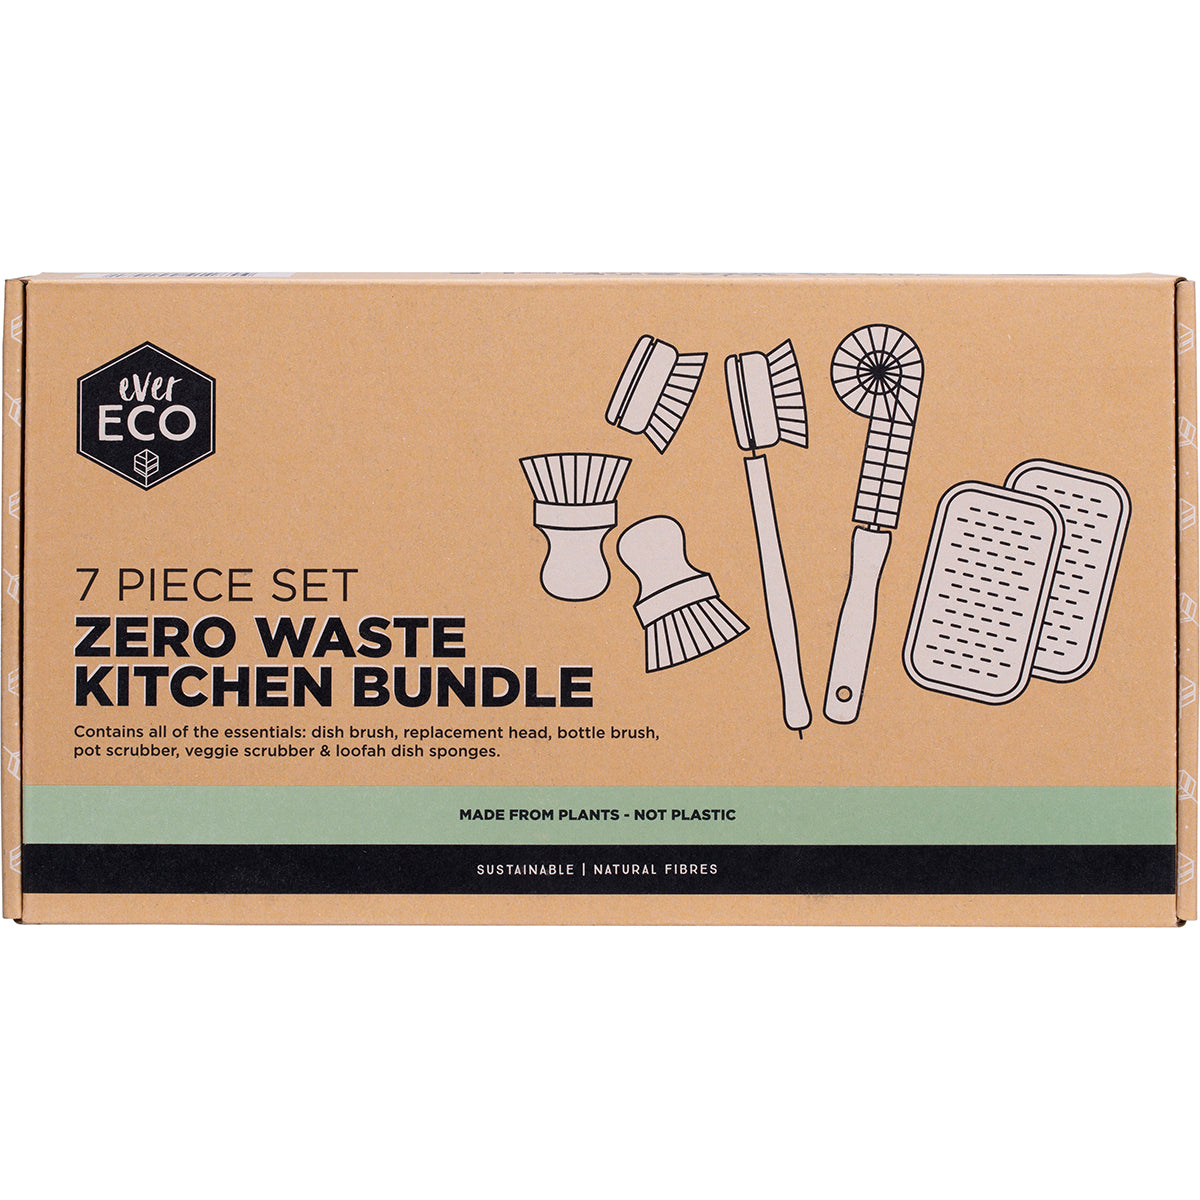 Product box front for ever eco zero waste kitchen cleaning bundle 7 piece set